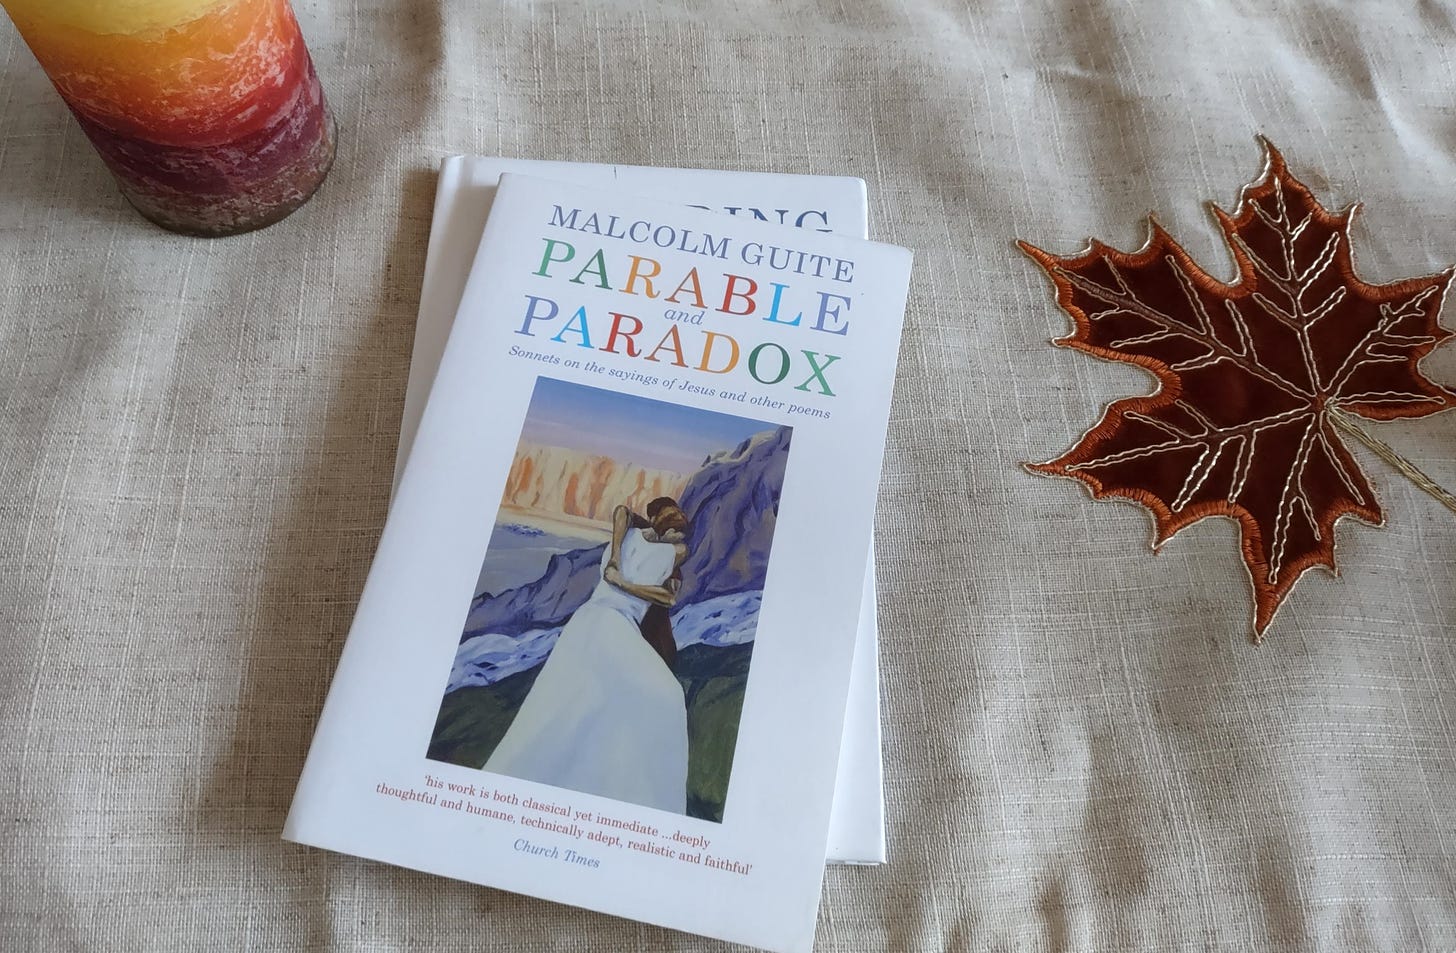 Book titled Parable and Paradox